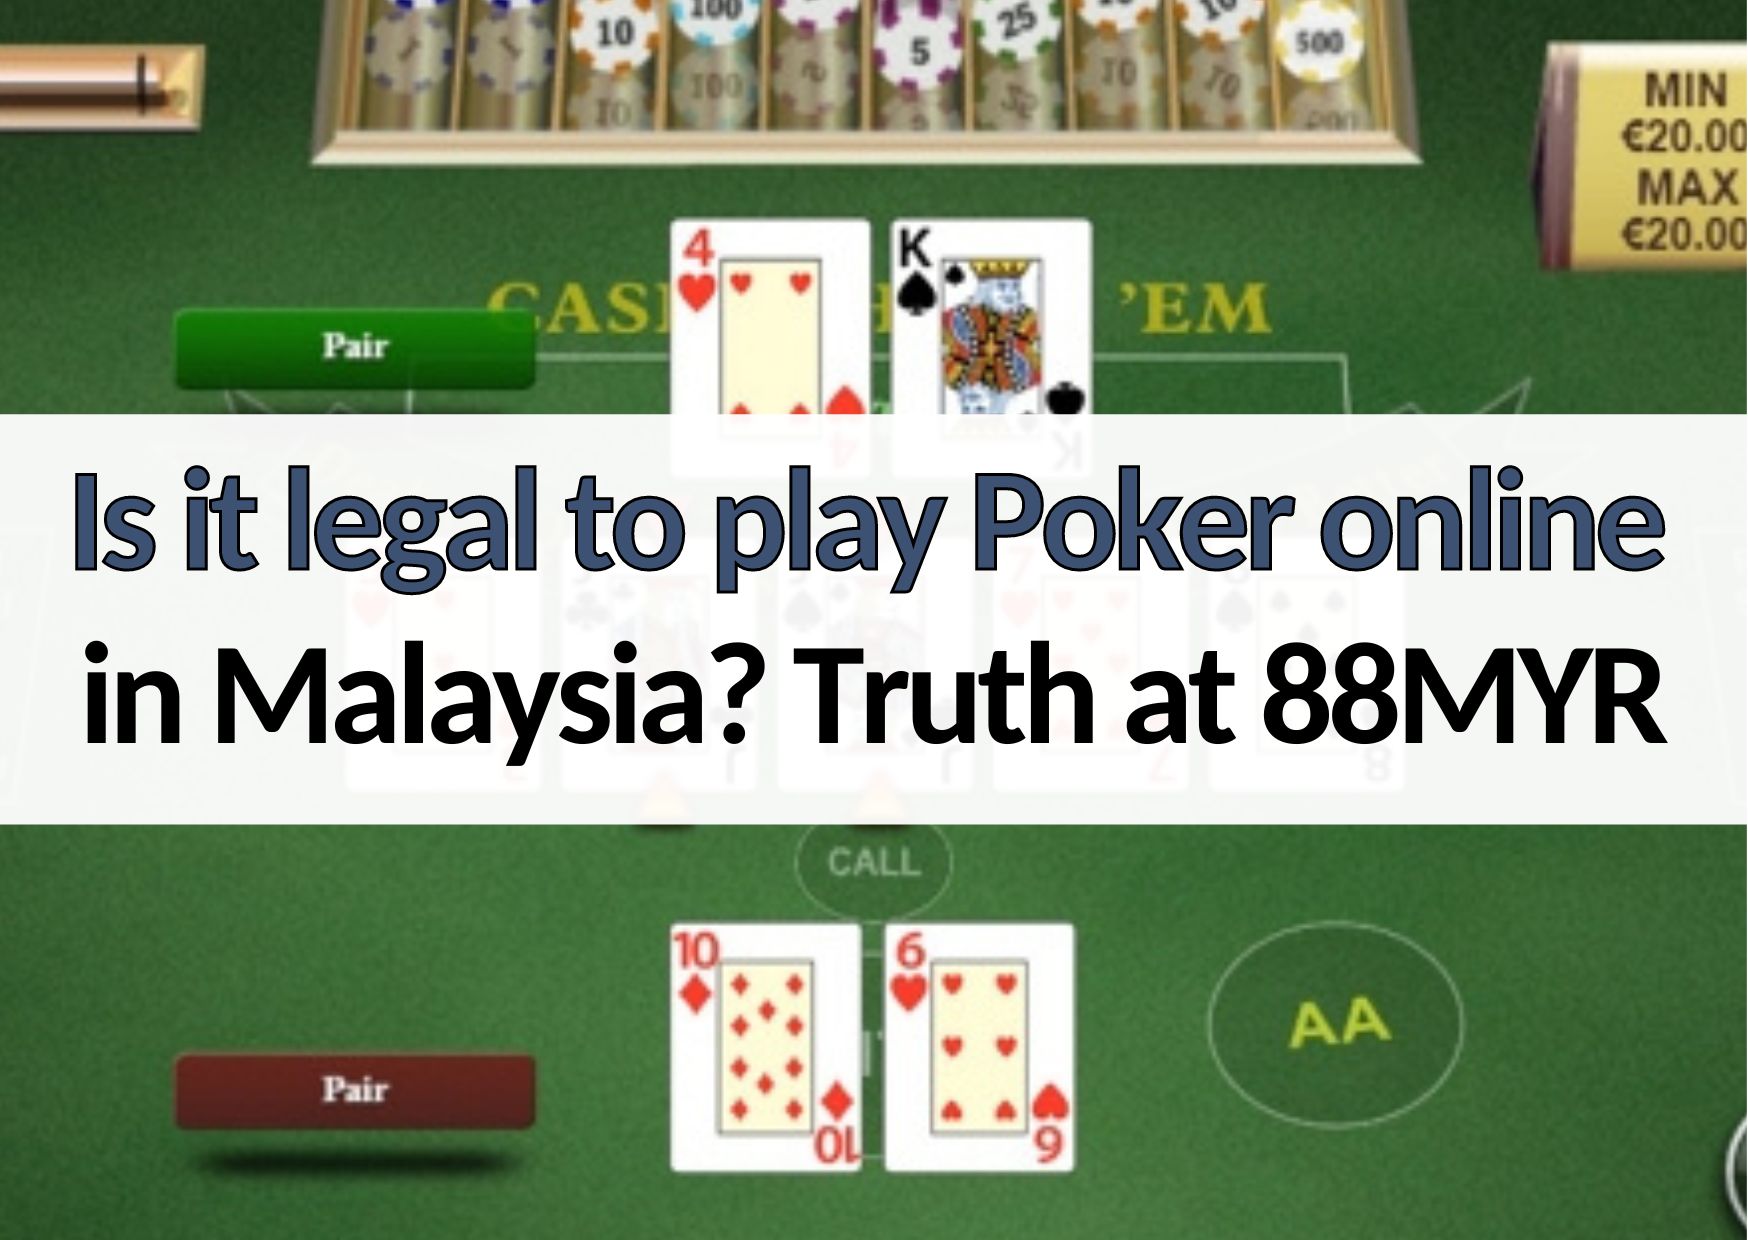 Is it legal to play Poker online